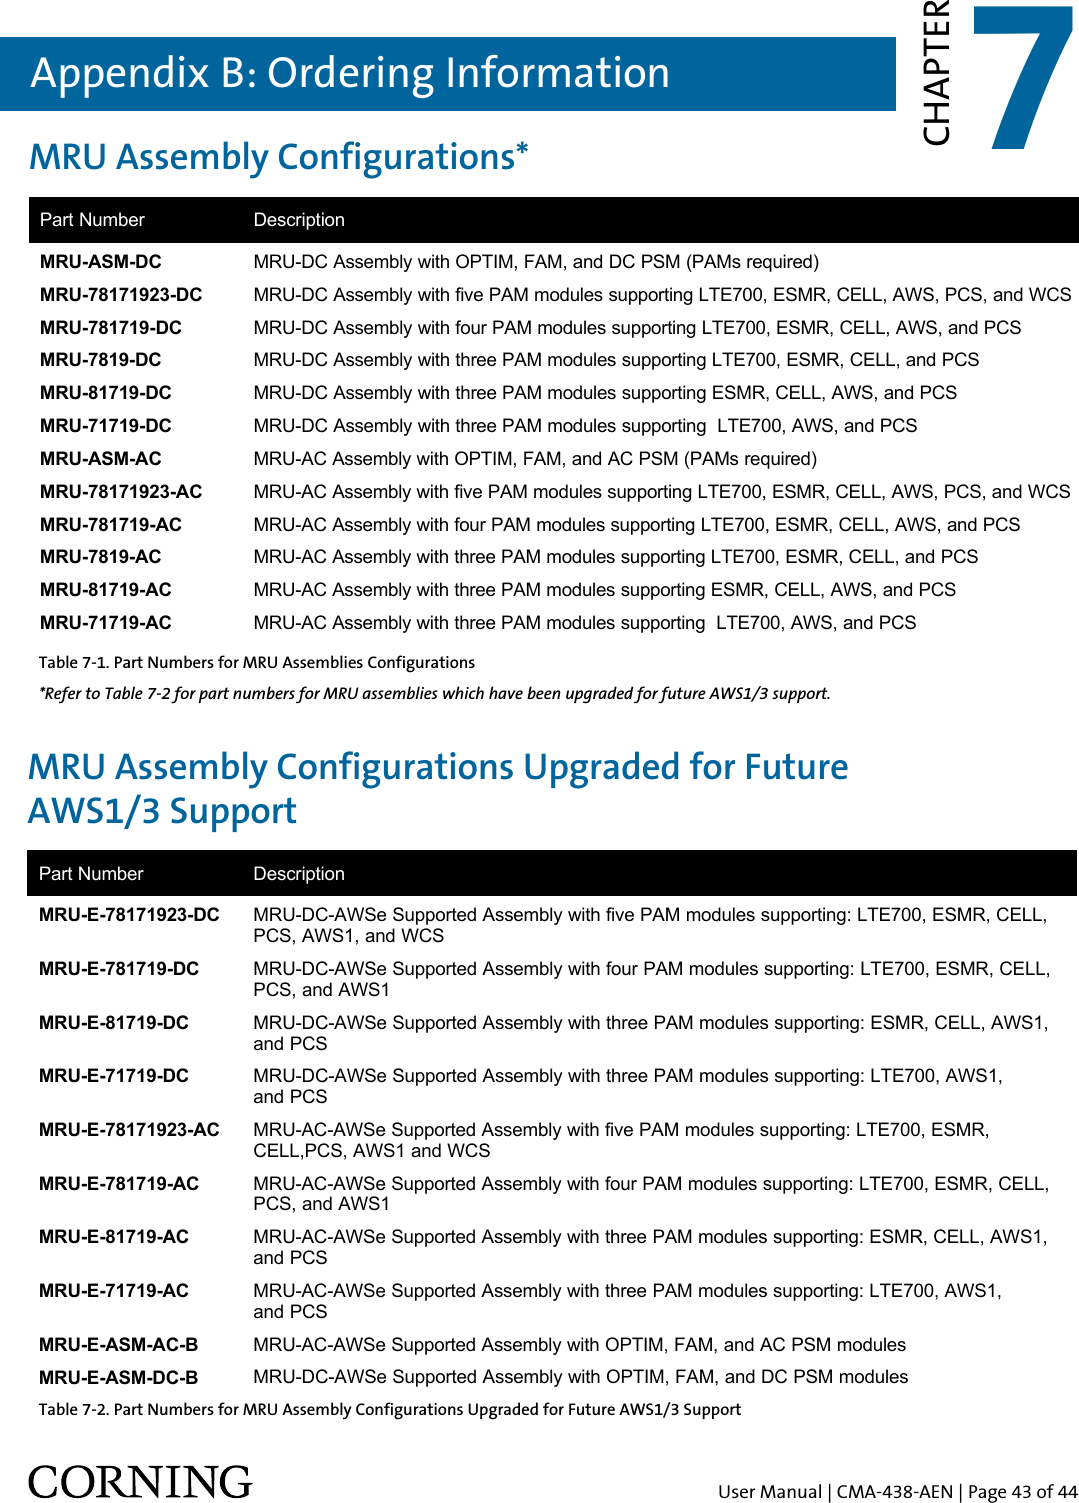 User Manual | CMA-438-AEN | Page 43 of 44MRU Assembly Configurations* Appendix B: Ordering Information 7CHAPTERPart NumberMRU-ASM-DCMRU-78171923-DCMRU-781719-DCMRU-7819-DCMRU-81719-DCMRU-71719-DCMRU-ASM-ACMRU-78171923-ACMRU-781719-ACMRU-7819-ACMRU-81719-ACMRU-71719-ACDescriptionMRU-DC Assembly with OPTIM, FAM, and DC PSM (PAMs required)MRU-DC Assembly with five PAM modules supporting LTE700, ESMR, CELL, AWS, PCS, and WCS MRU-DC Assembly with four PAM modules supporting LTE700, ESMR, CELL, AWS, and PCS  MRU-DC Assembly with three PAM modules supporting LTE700, ESMR, CELL, and PCSMRU-DC Assembly with three PAM modules supporting ESMR, CELL, AWS, and PCSMRU-DC Assembly with three PAM modules supporting  LTE700, AWS, and PCSMRU-AC Assembly with OPTIM, FAM, and AC PSM (PAMs required)MRU-AC Assembly with five PAM modules supporting LTE700, ESMR, CELL, AWS, PCS, and WCSMRU-AC Assembly with four PAM modules supporting LTE700, ESMR, CELL, AWS, and PCS MRU-AC Assembly with three PAM modules supporting LTE700, ESMR, CELL, and PCSMRU-AC Assembly with three PAM modules supporting ESMR, CELL, AWS, and PCSMRU-AC Assembly with three PAM modules supporting  LTE700, AWS, and PCSMRU Assembly Configurations Upgraded for Future  AWS1/3 Support Part NumberMRU-E-78171923-DC MRU-E-781719-DC MRU-E-81719-DC MRU-E-71719-DC MRU-E-78171923-AC MRU-E-781719-AC MRU-E-81719-AC MRU-E-71719-AC MRU-E-ASM-AC-BMRU-E-ASM-DC-BDescriptionMRU-DC-AWSe Supported Assembly with five PAM modules supporting: LTE700, ESMR, CELL, PCS, AWS1, and WCS MRU-DC-AWSe Supported Assembly with four PAM modules supporting: LTE700, ESMR, CELL, PCS, and AWS1MRU-DC-AWSe Supported Assembly with three PAM modules supporting: ESMR, CELL, AWS1, and PCSMRU-DC-AWSe Supported Assembly with three PAM modules supporting: LTE700, AWS1,  and PCSMRU-AC-AWSe Supported Assembly with five PAM modules supporting: LTE700, ESMR, CELL,PCS, AWS1 and WCSMRU-AC-AWSe Supported Assembly with four PAM modules supporting: LTE700, ESMR, CELL, PCS, and AWS1MRU-AC-AWSe Supported Assembly with three PAM modules supporting: ESMR, CELL, AWS1, and PCSMRU-AC-AWSe Supported Assembly with three PAM modules supporting: LTE700, AWS1,  and PCSMRU-AC-AWSe Supported Assembly with OPTIM, FAM, and AC PSM modulesMRU-DC-AWSe Supported Assembly with OPTIM, FAM, and DC PSM modulesTable 7-1. Part Numbers for MRU Assemblies Configurations*Refer to Table 7-2 for part numbers for MRU assemblies which have been upgraded for future AWS1/3 support. Table 7-2. Part Numbers for MRU Assembly Configurations Upgraded for Future AWS1/3 Support